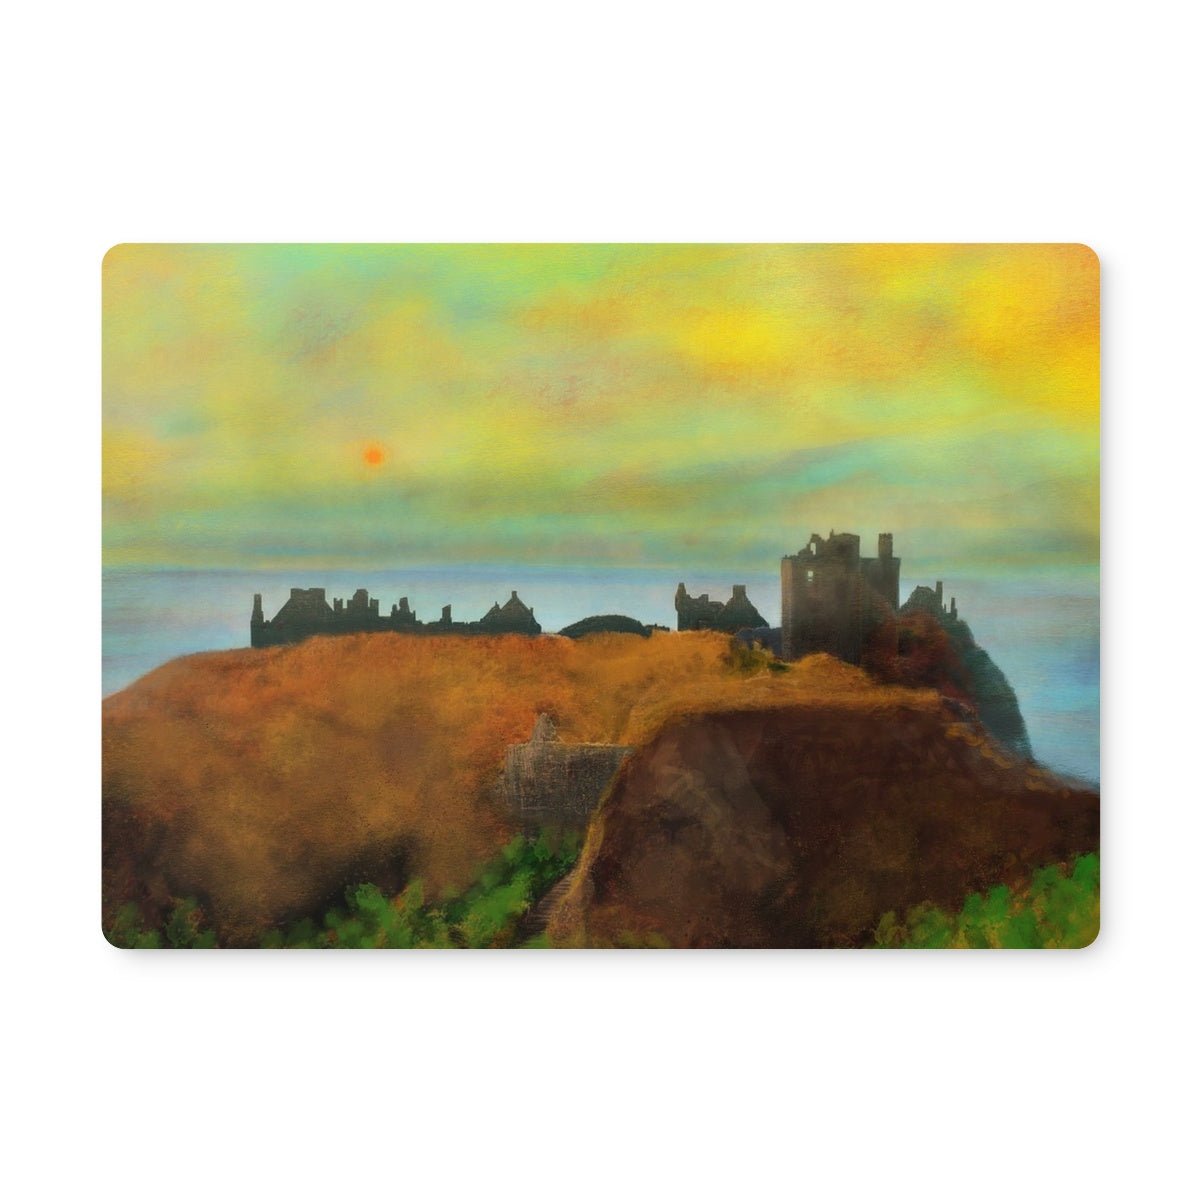 Dunnottar Castle Art Gifts Placemat-Placemats-Scottish Castles Art Gallery-Single Placemat-Paintings, Prints, Homeware, Art Gifts From Scotland By Scottish Artist Kevin Hunter